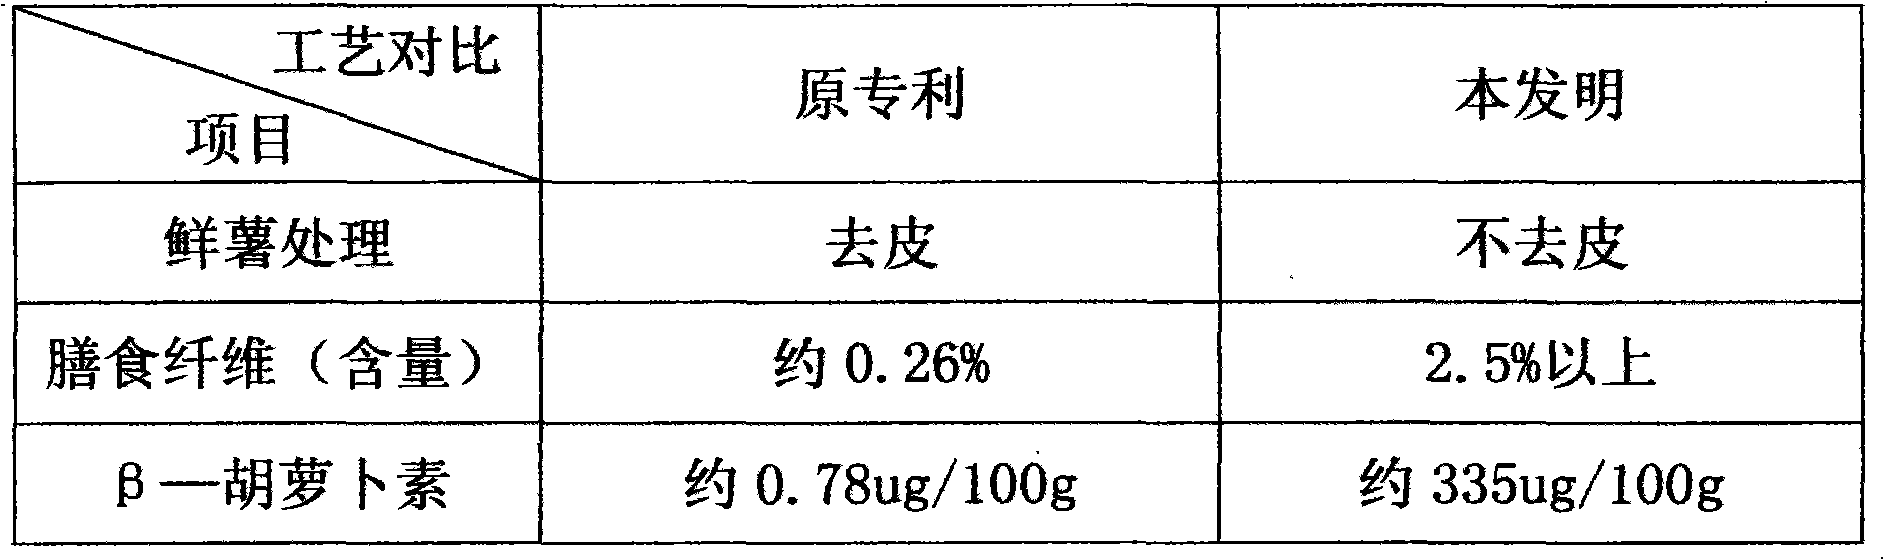 Process for producing vermicelli from sweet potato